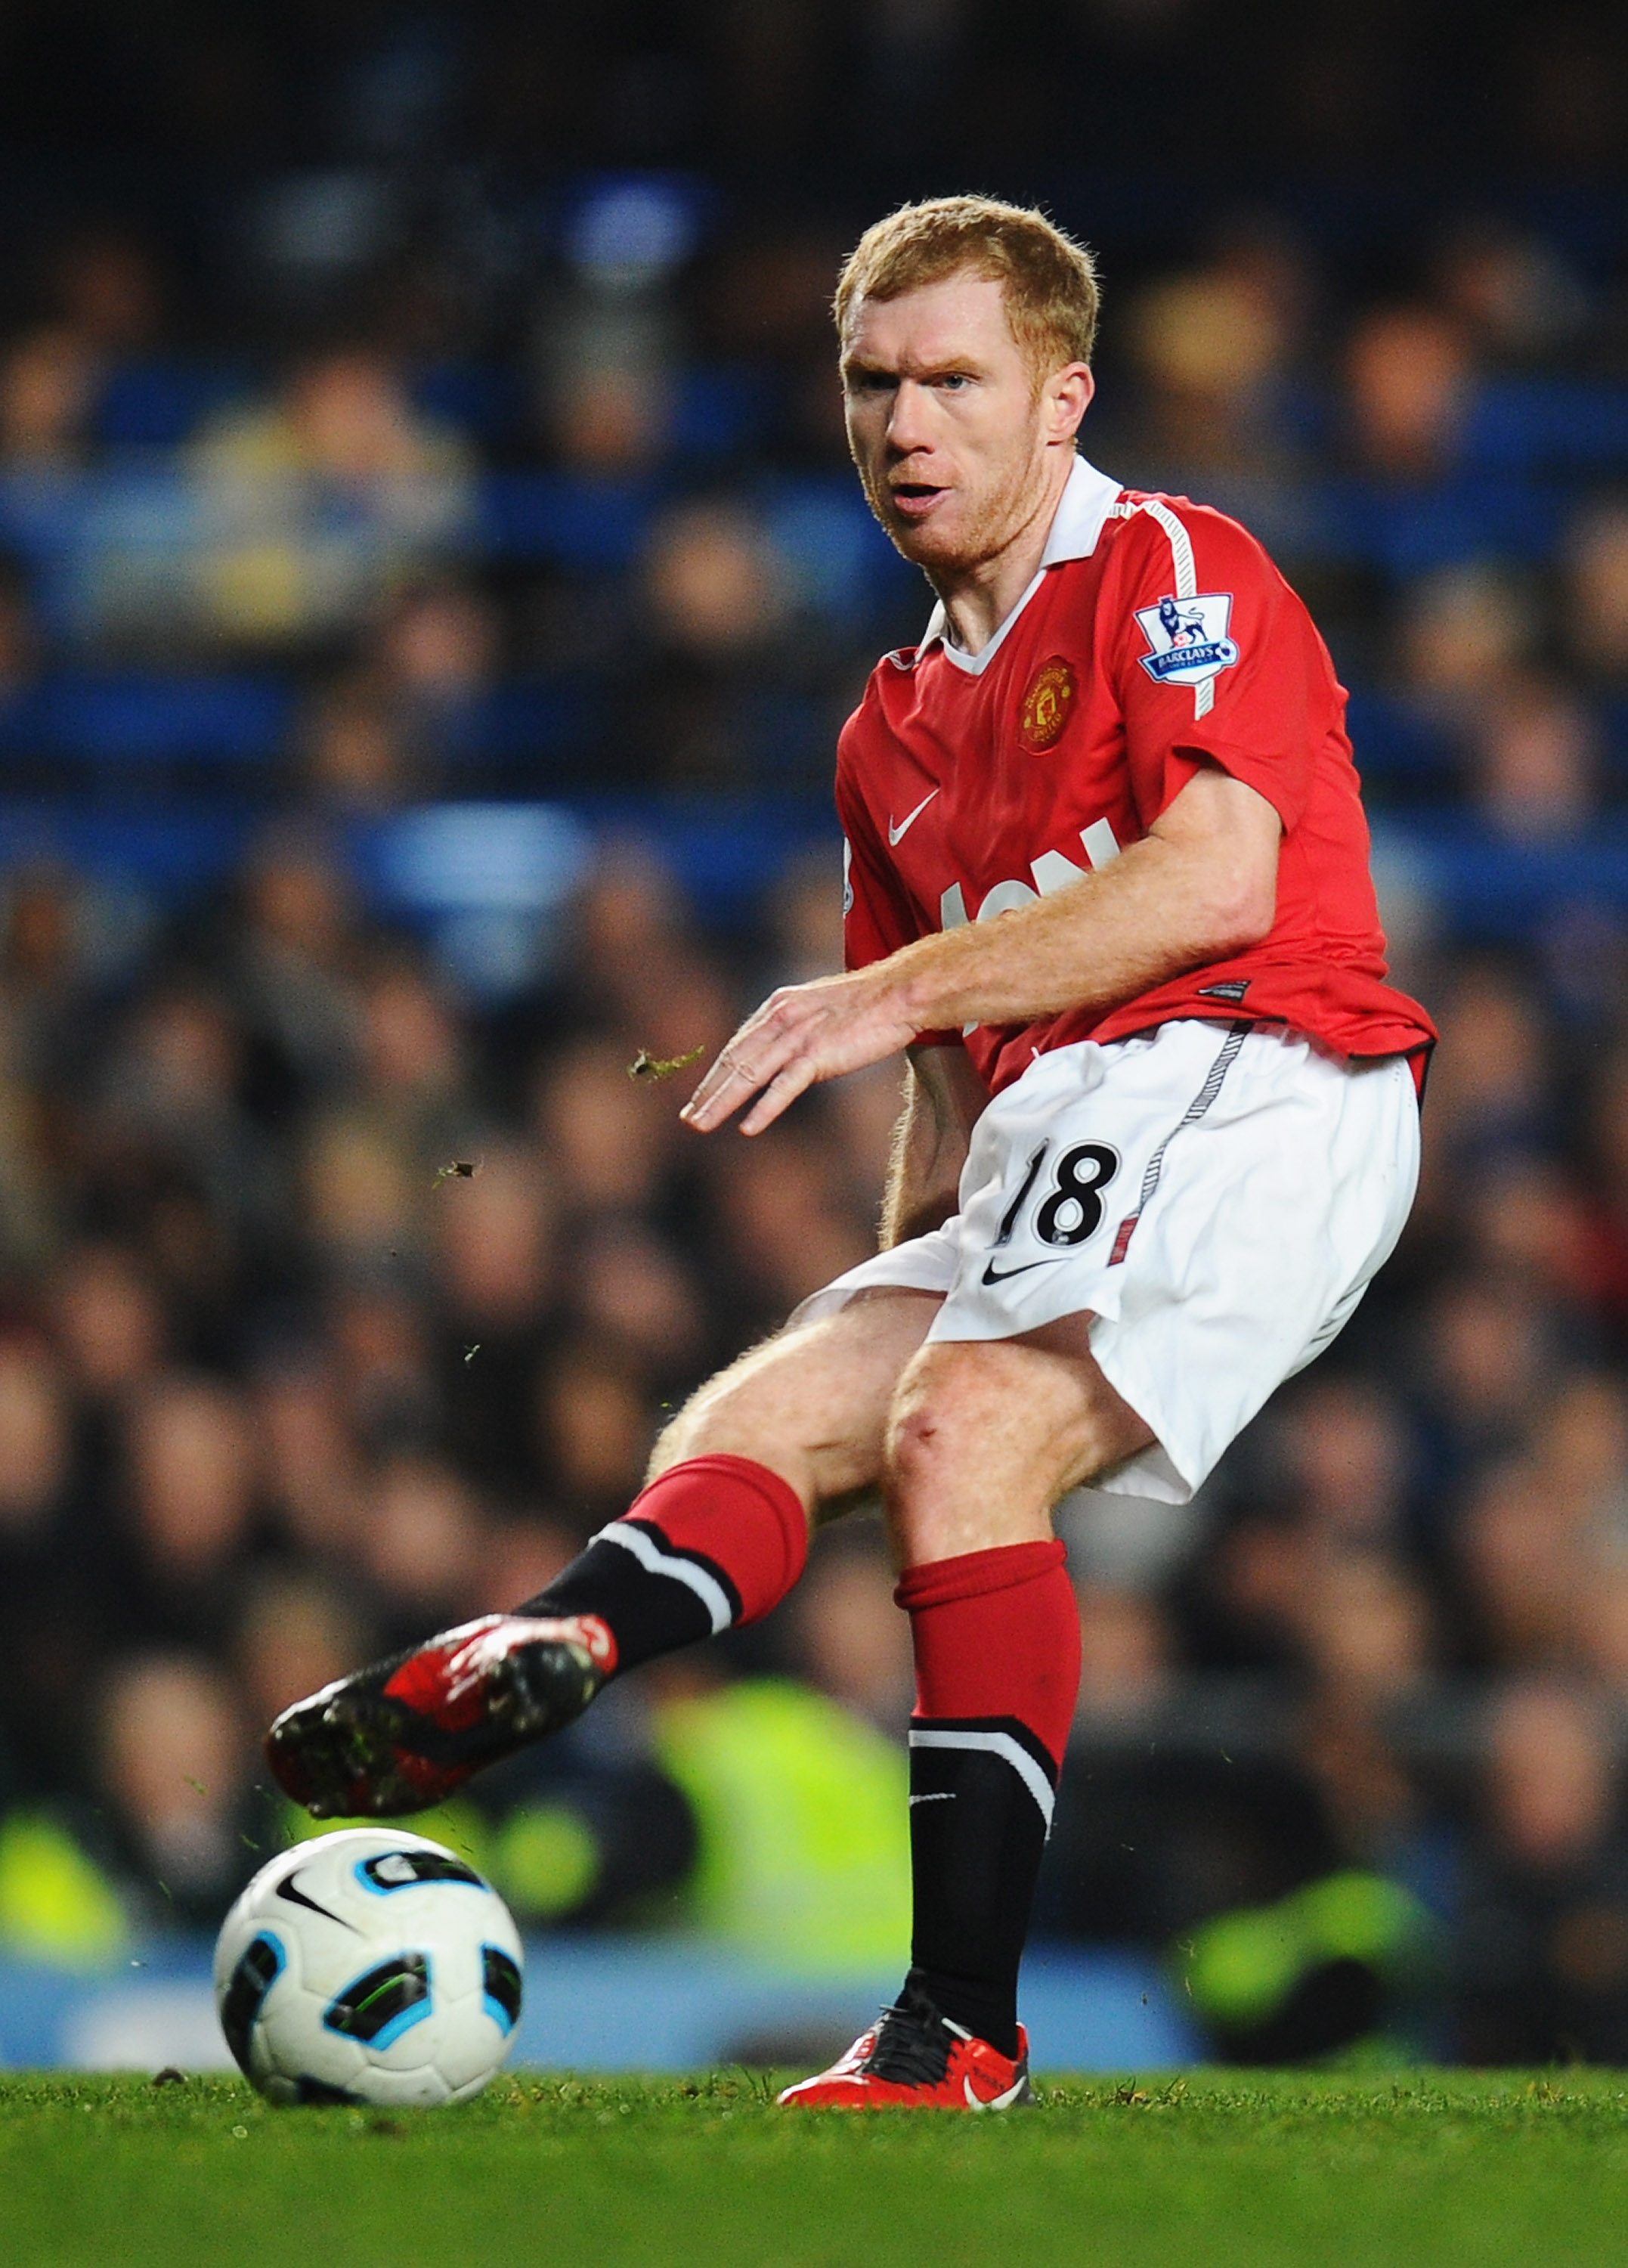 LONDON, ENGLAND - MARCH 01: Paul Scholes of Manchester United in action during the Barclays Premier League match between Chelsea and Manchester United at Stamford Bridge on March 1, 2011 in London, England.  (Photo by Clive Mason/Getty Images)